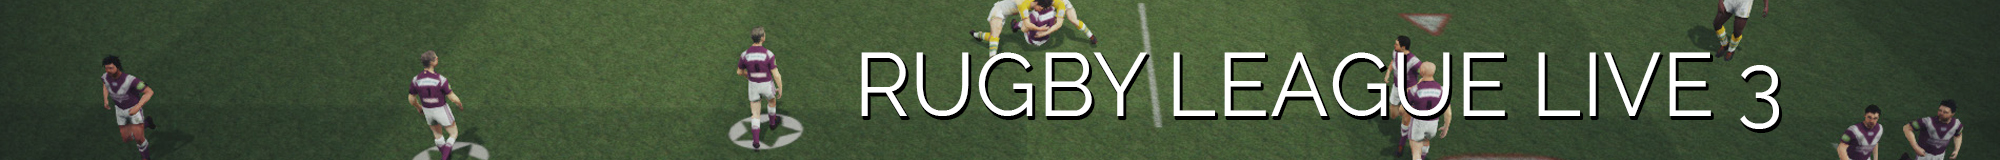 RUGBY LEAGUE 3